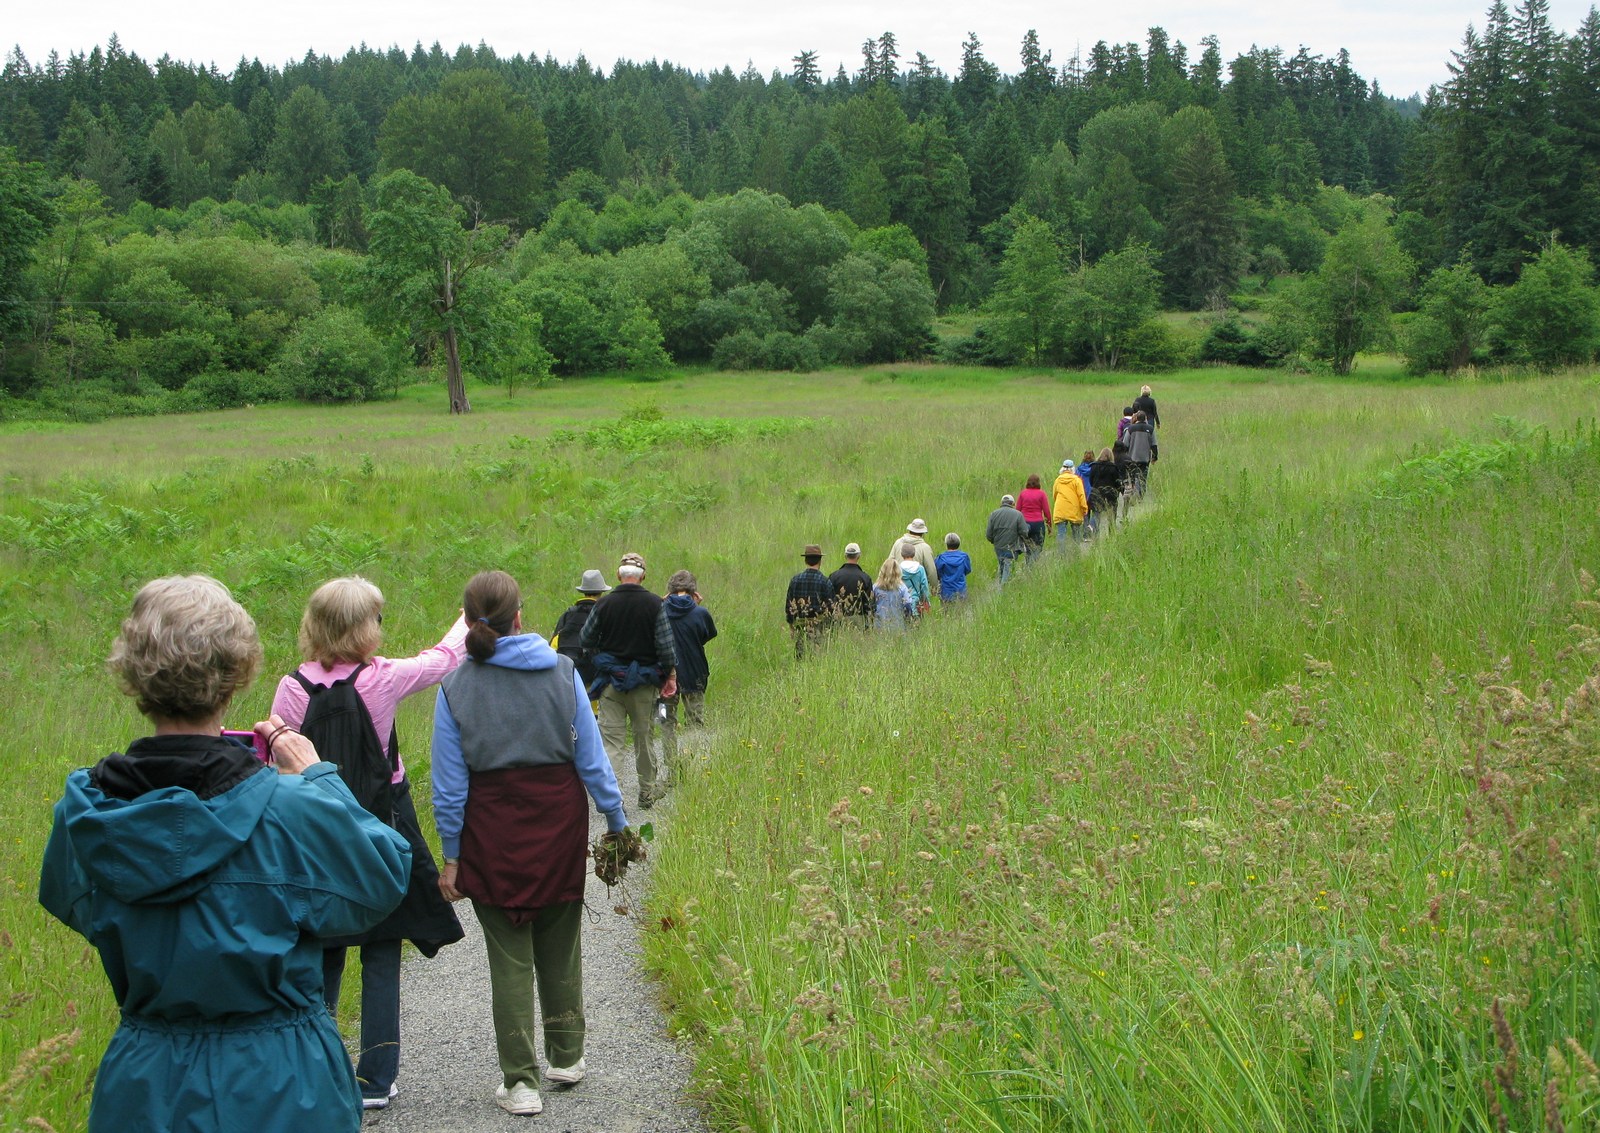 group walks on path through open meadow of waist-high grass at Evans Creek Preserve, lots of deciduous and coniferous trees loom in the background